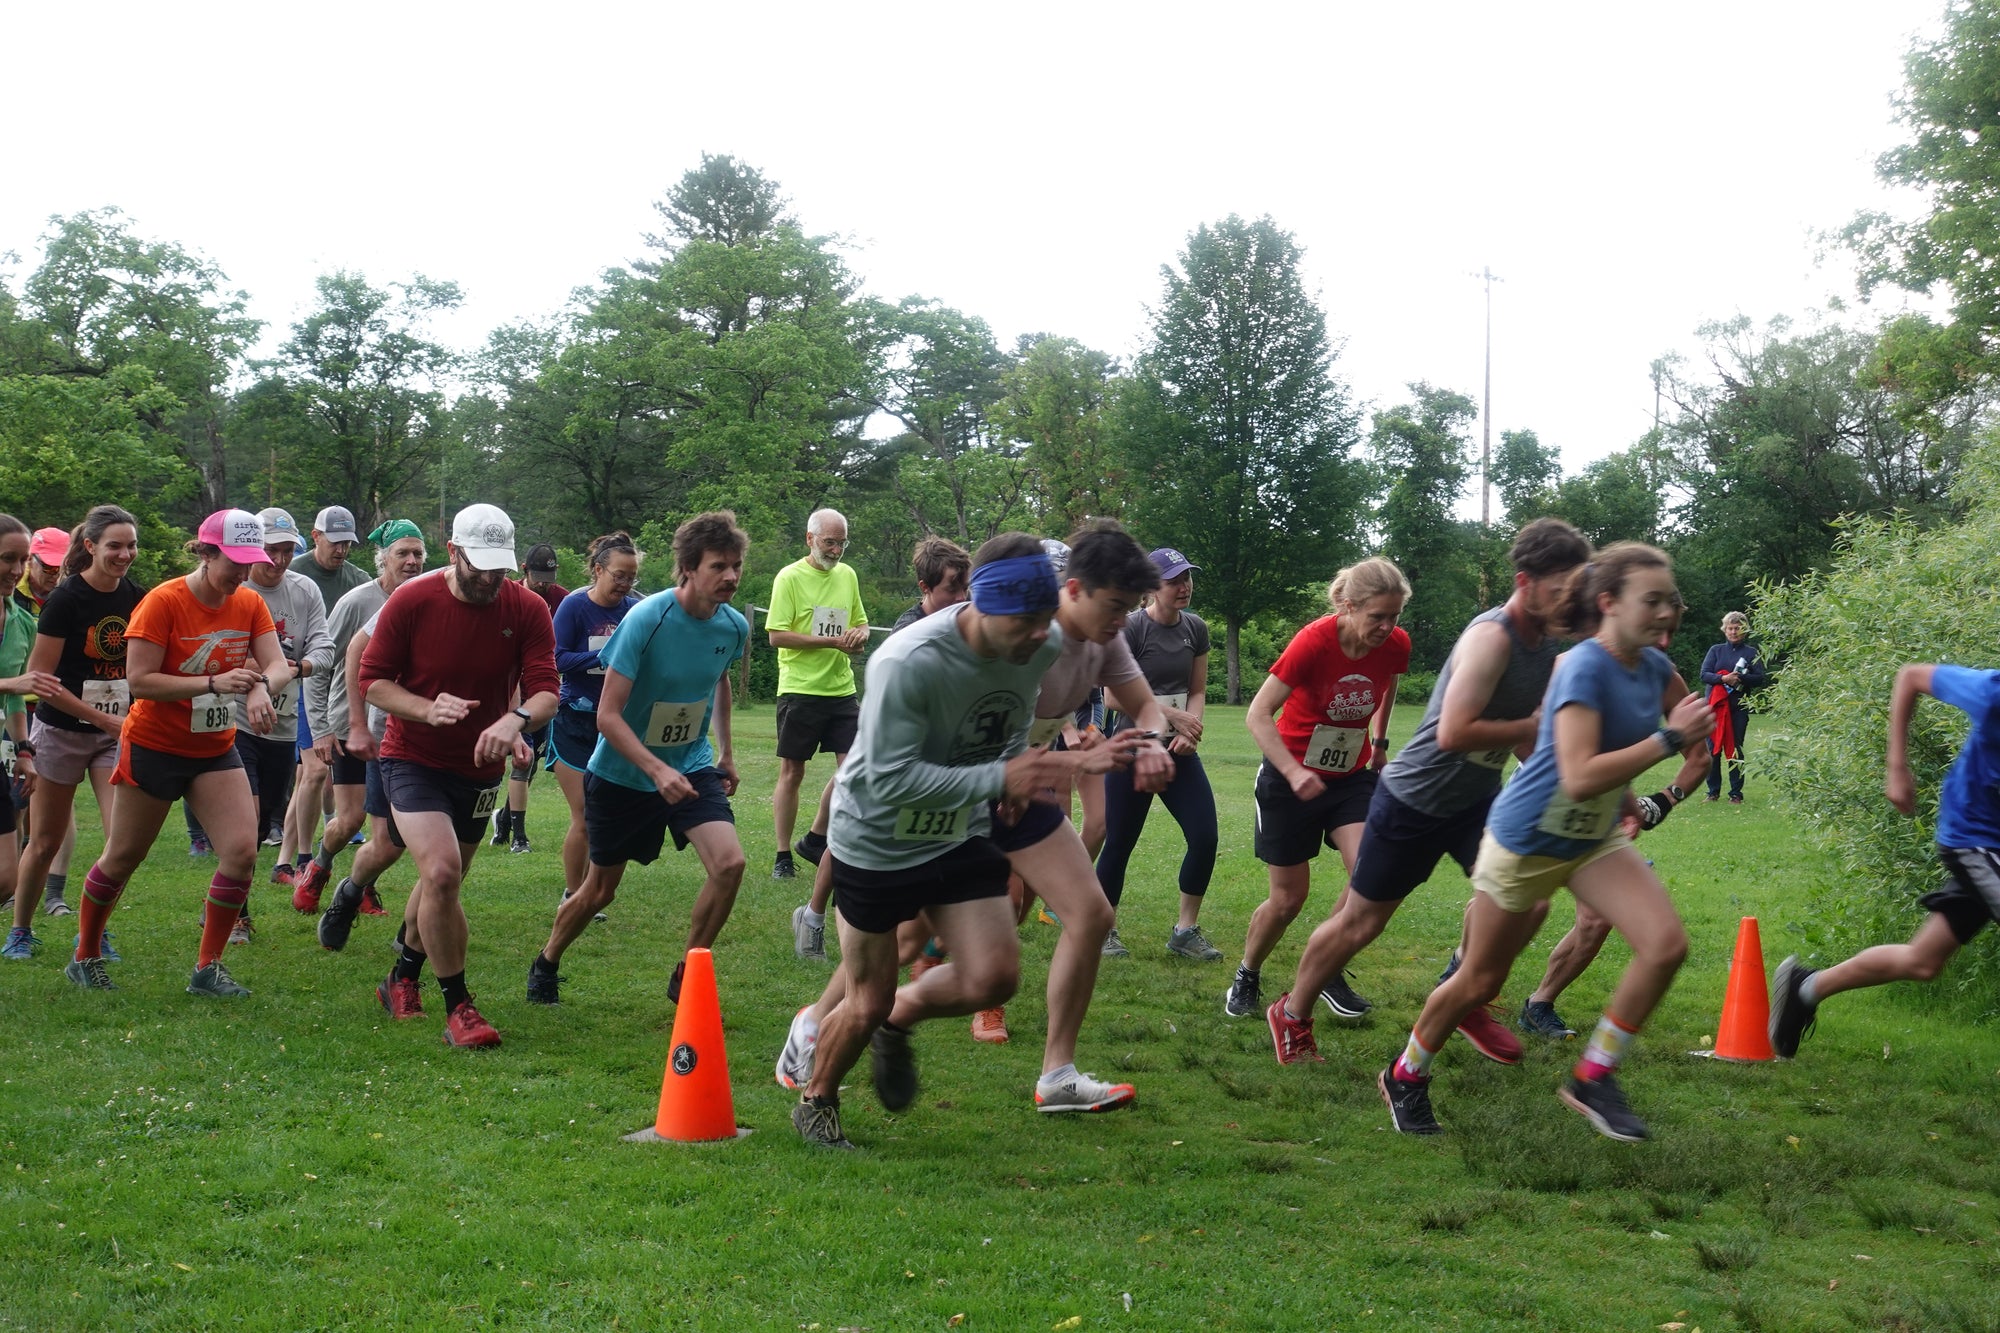 A group of 30 runners starting a race in a green, grassy field